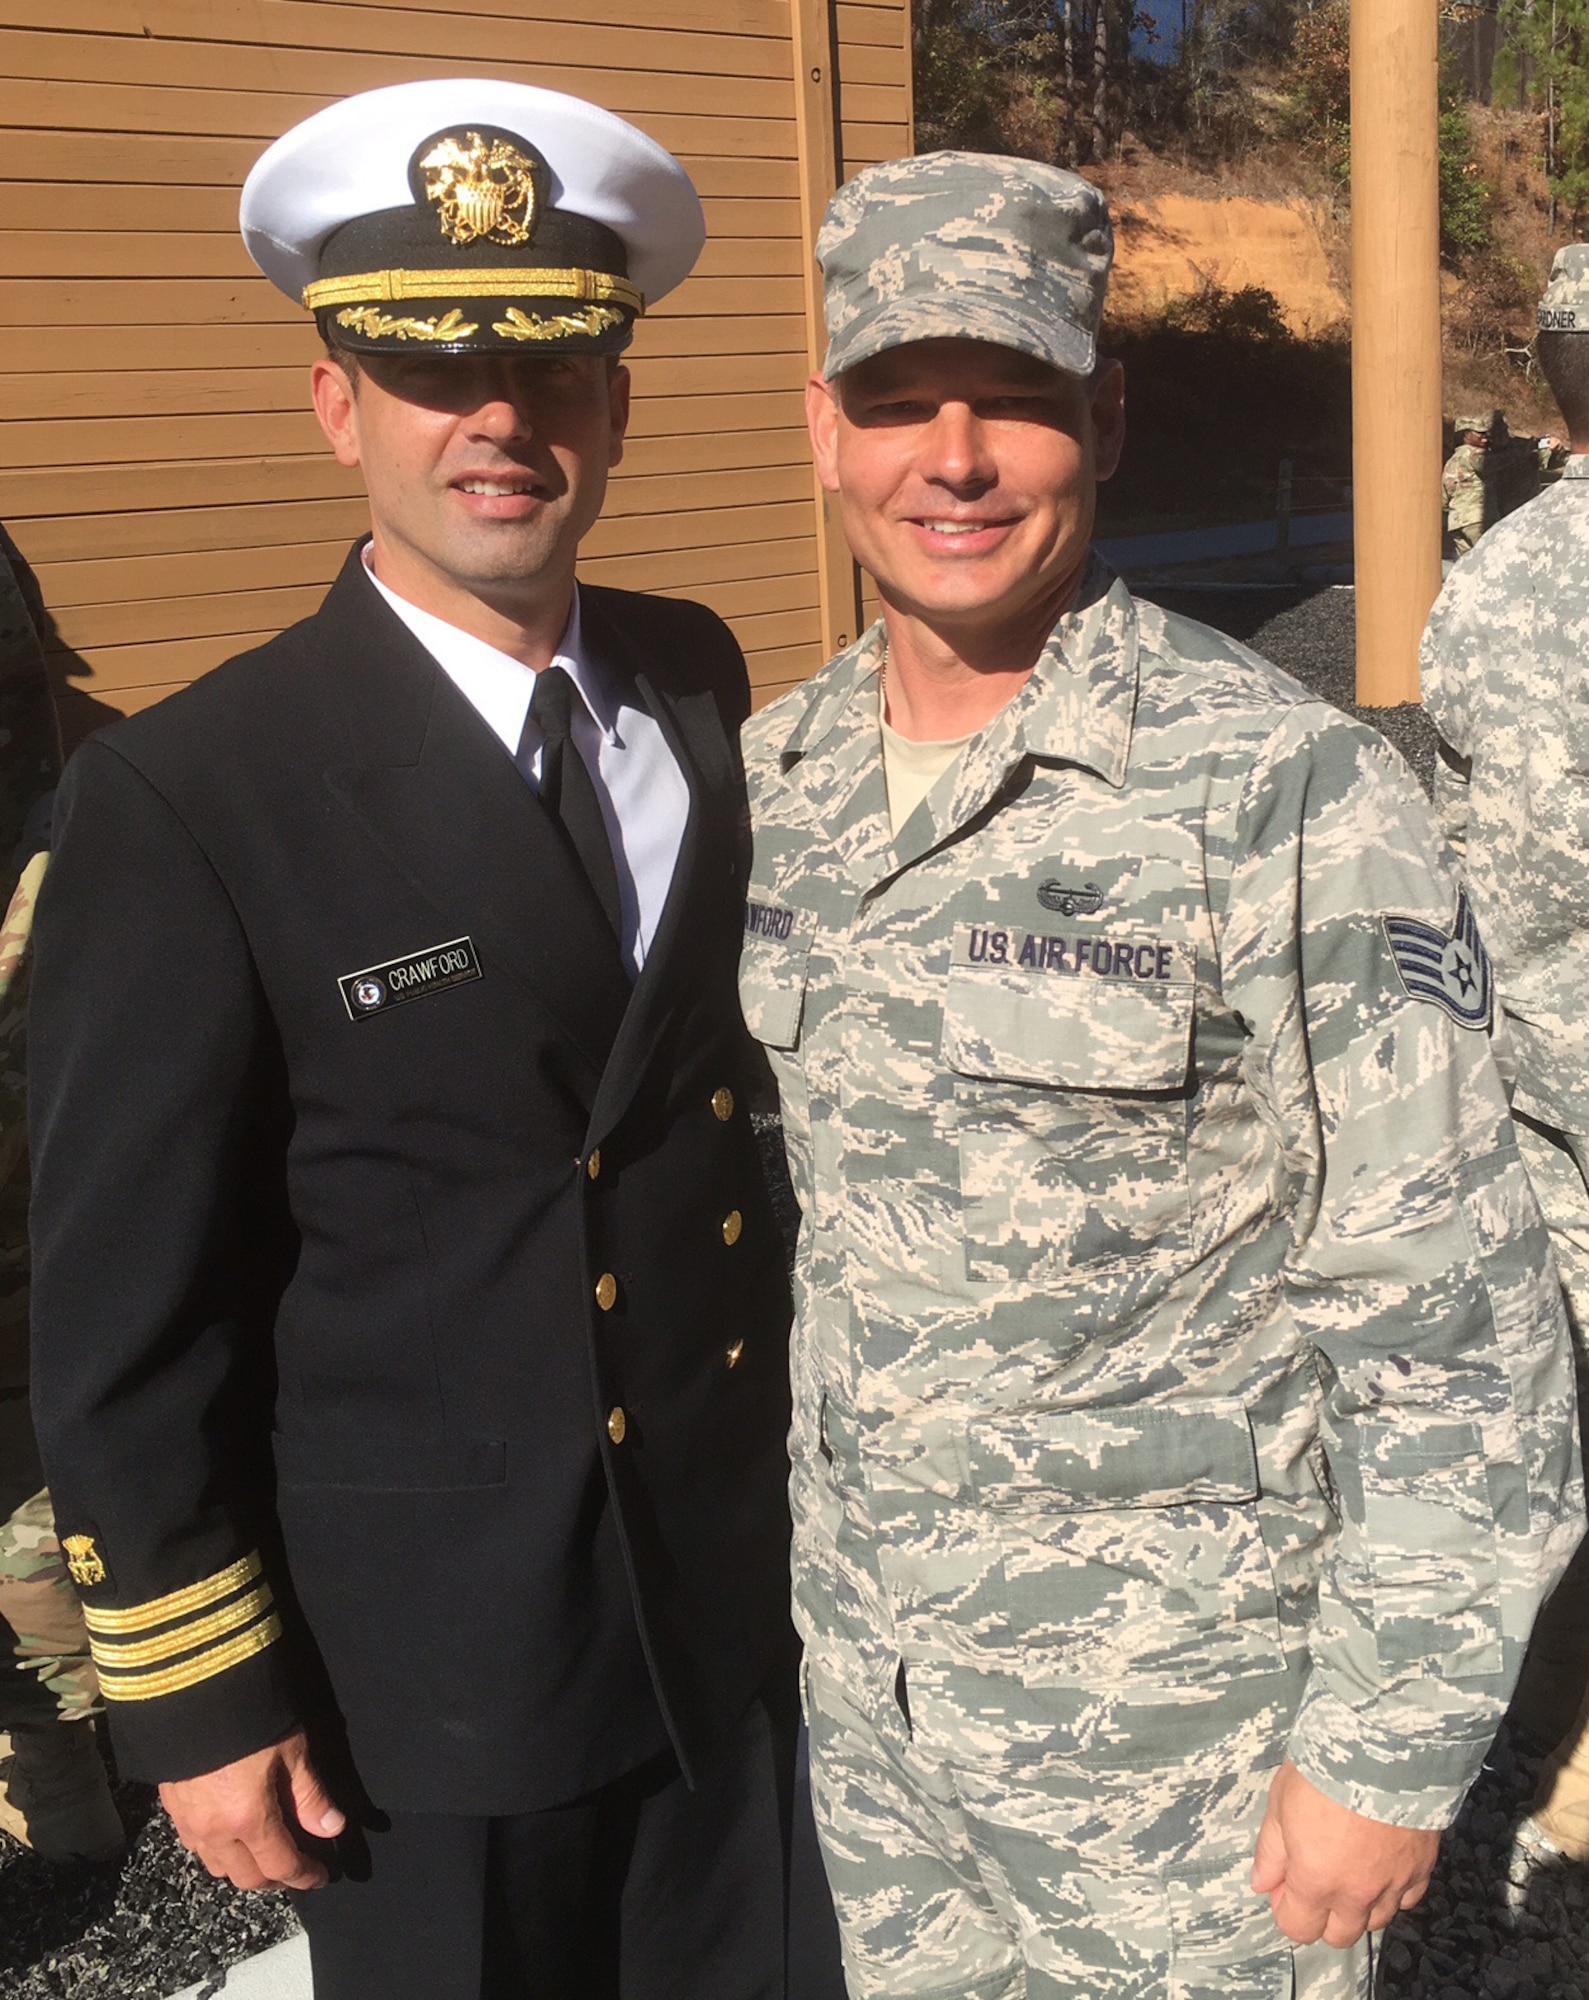 Staff Sgt. Kurtis Crawford, 512th Airlift Control Flight, Dover Air Force Base, Del., stands with his brother Navy Commander Todd Crawford, Department of Defense Health Services, Nov. 18, 2016, following Crawford's graduation from the Army's Air Assault School at Ft. Benning, Ga. Crawford's brother pinned on his air assault wings as part of the graduation ceremony. (U.S. Air Force/Courtesy Photo)